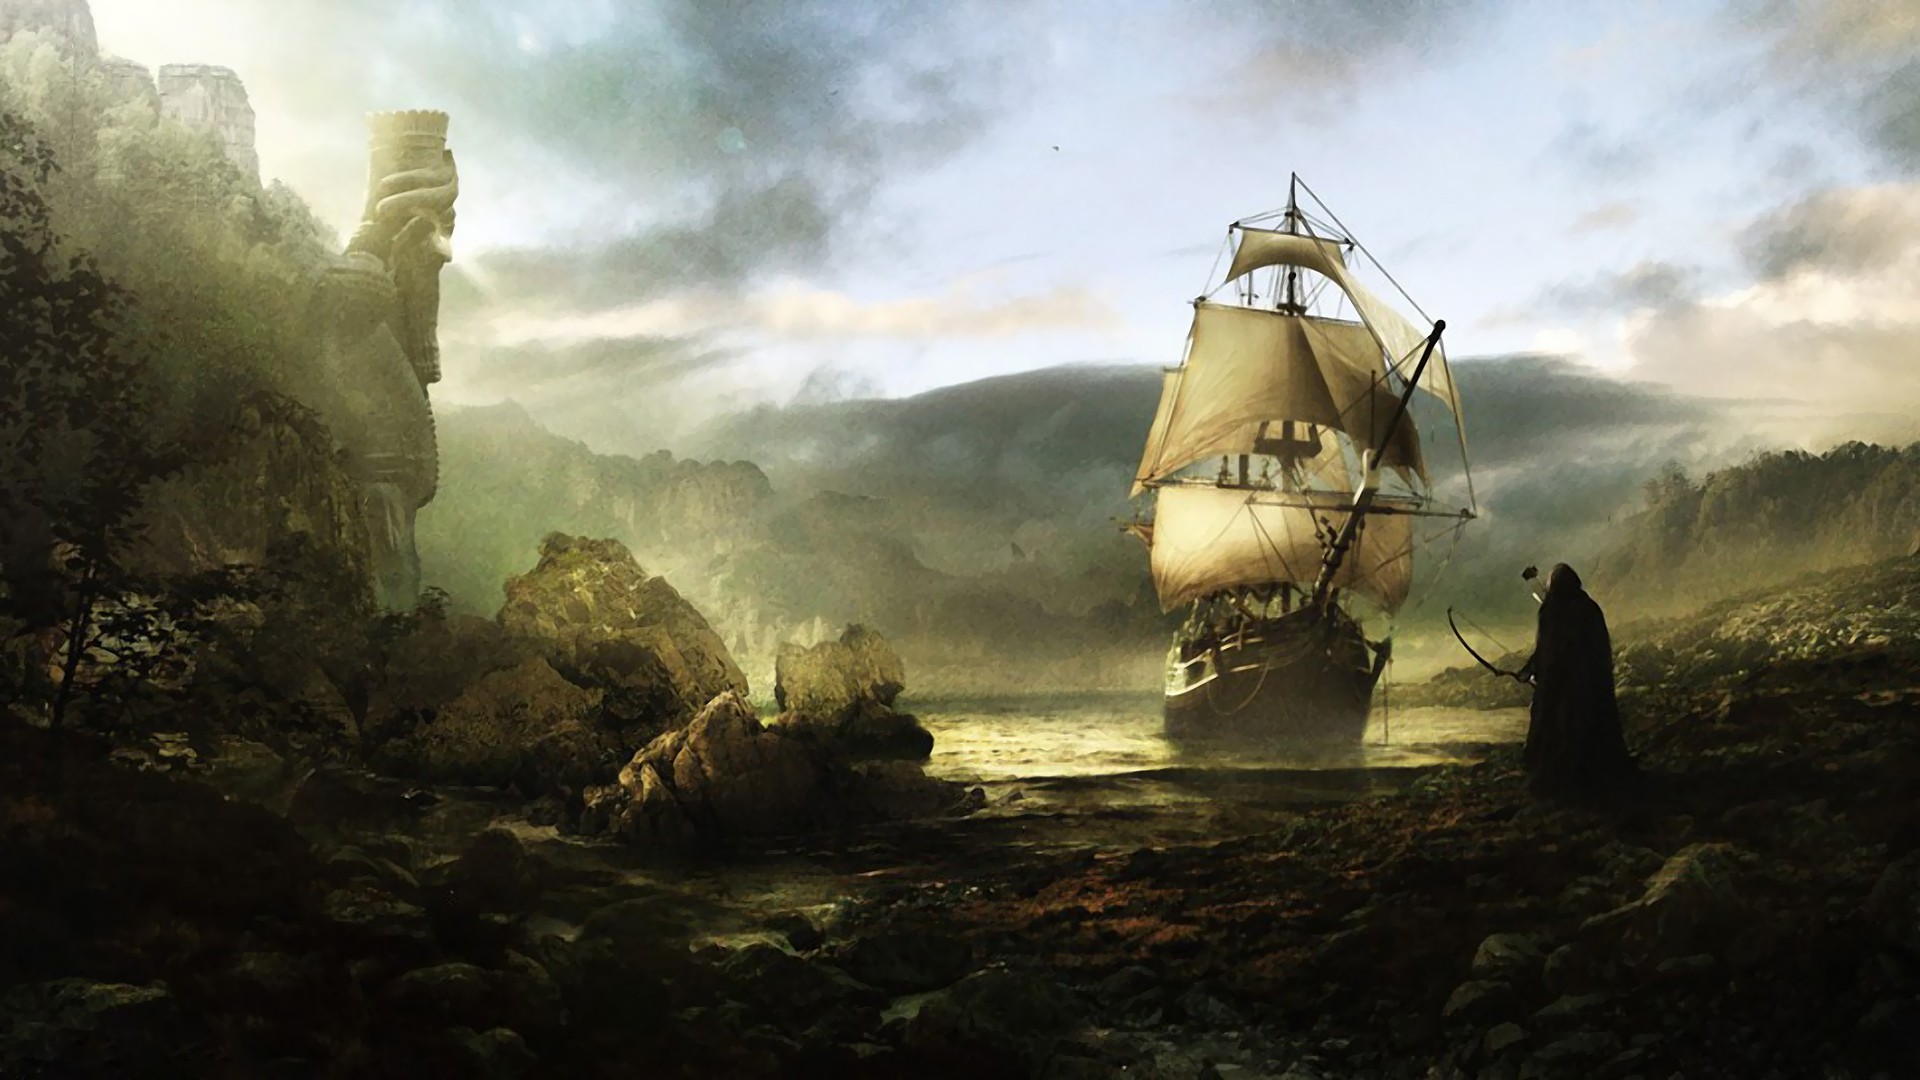 ship wallpaper hd,strategy video game,adventure game,manila galleon,vehicle,fluyt